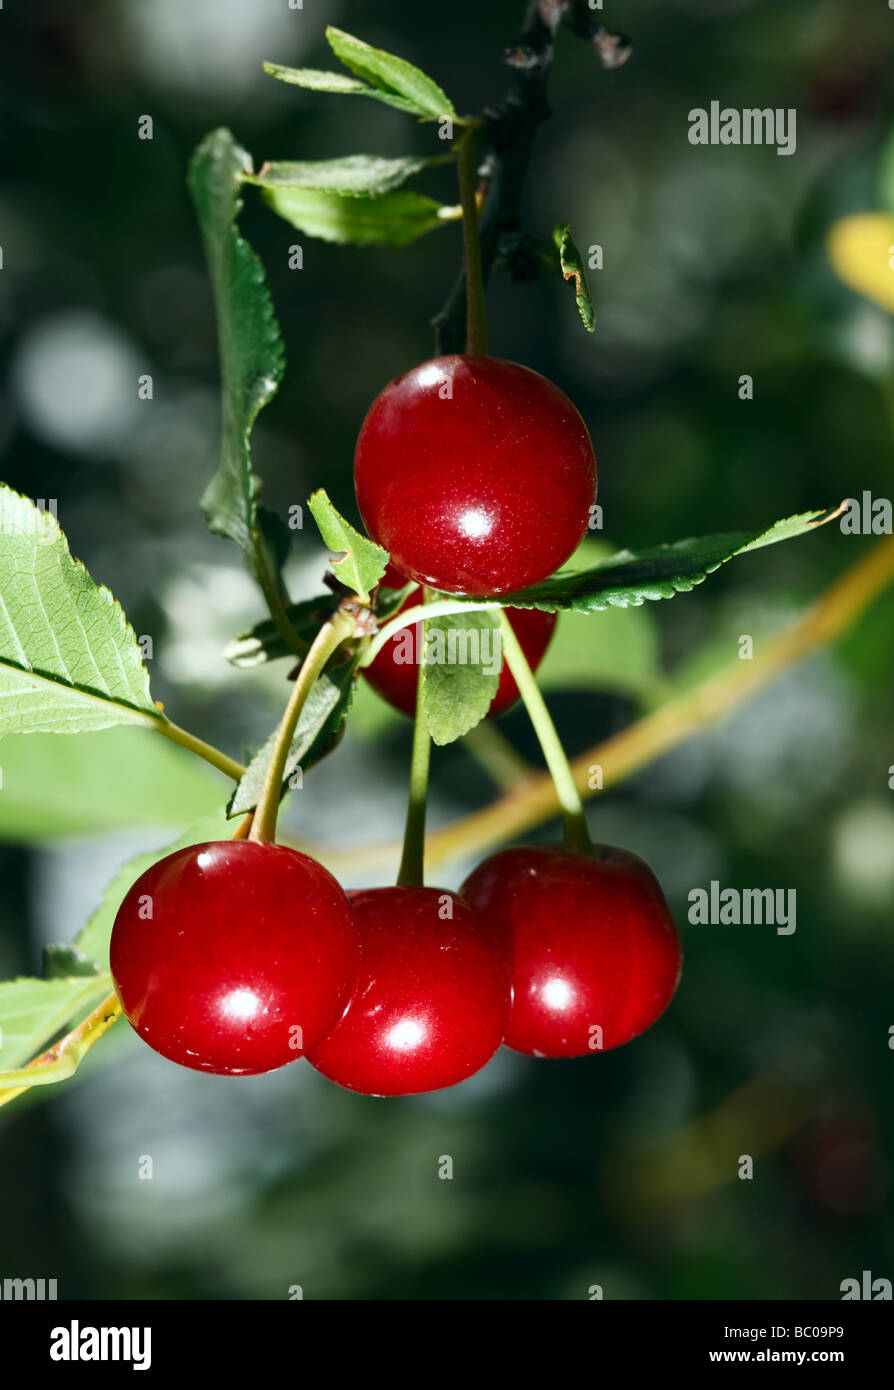 Red ripe cherry at the branch of tree Stock Photo